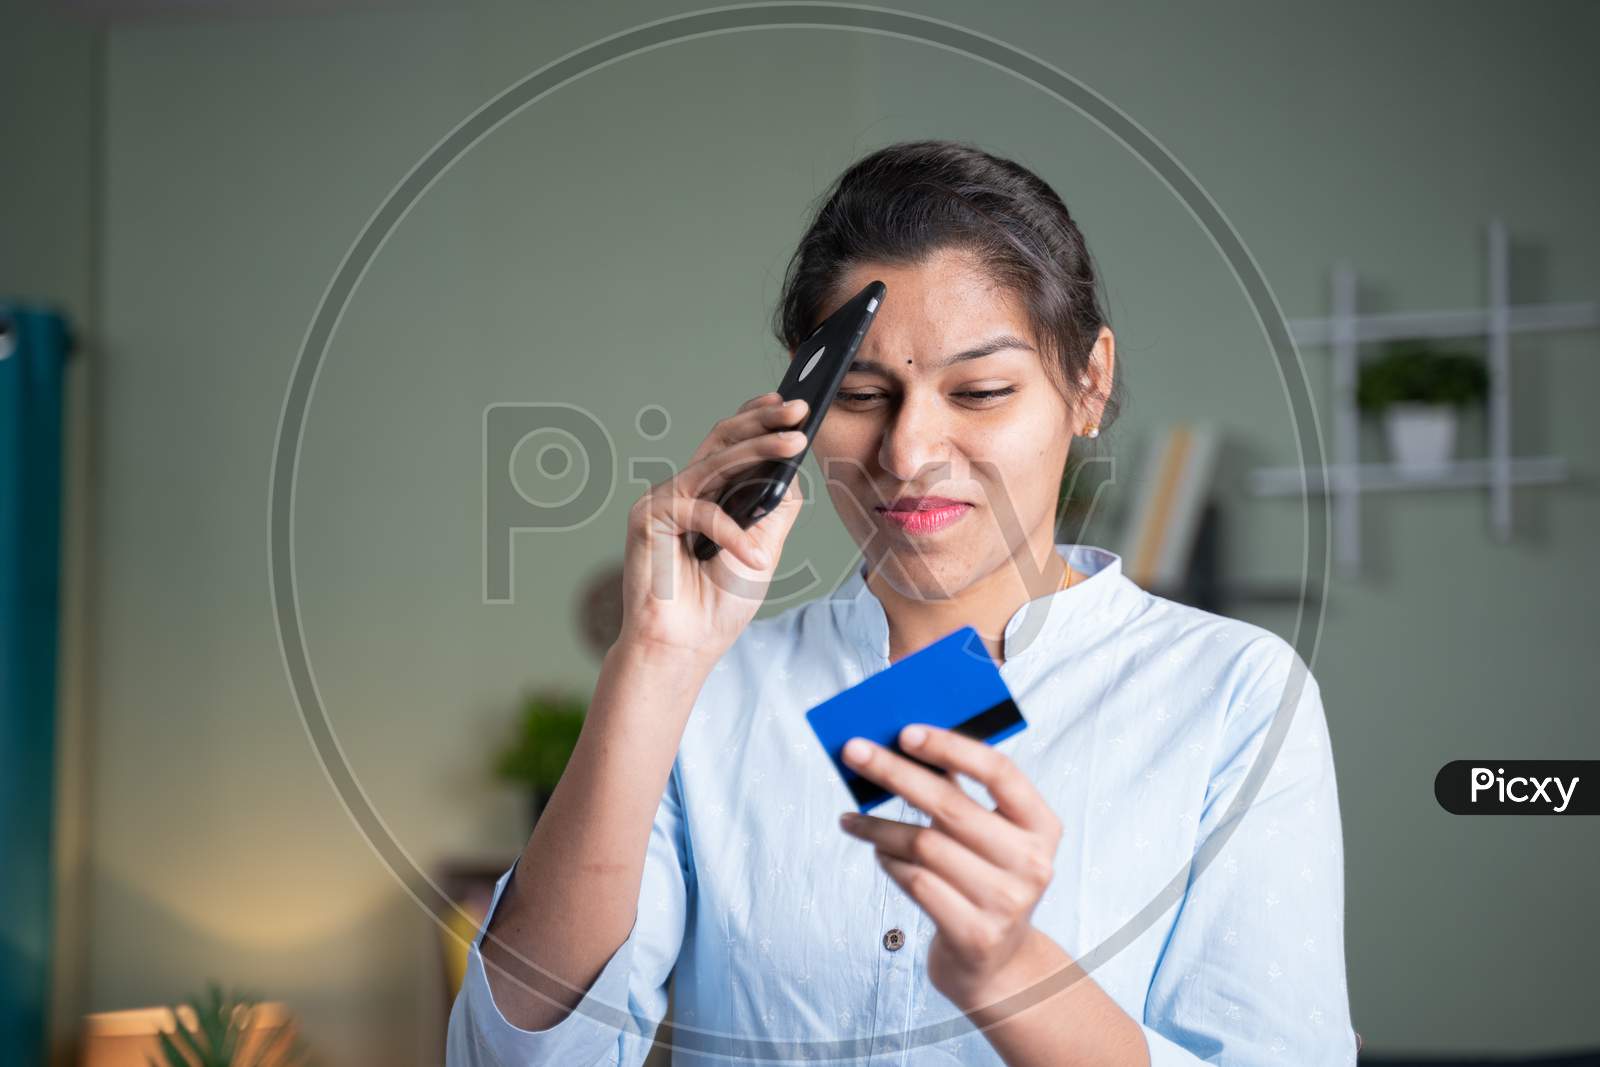 Young Business Woman Worried While Doing Online Payment Thorough Credit Card - Concept Unsuccessful, Failure Internet Payment Or Enter Wrong Password During Purchase.